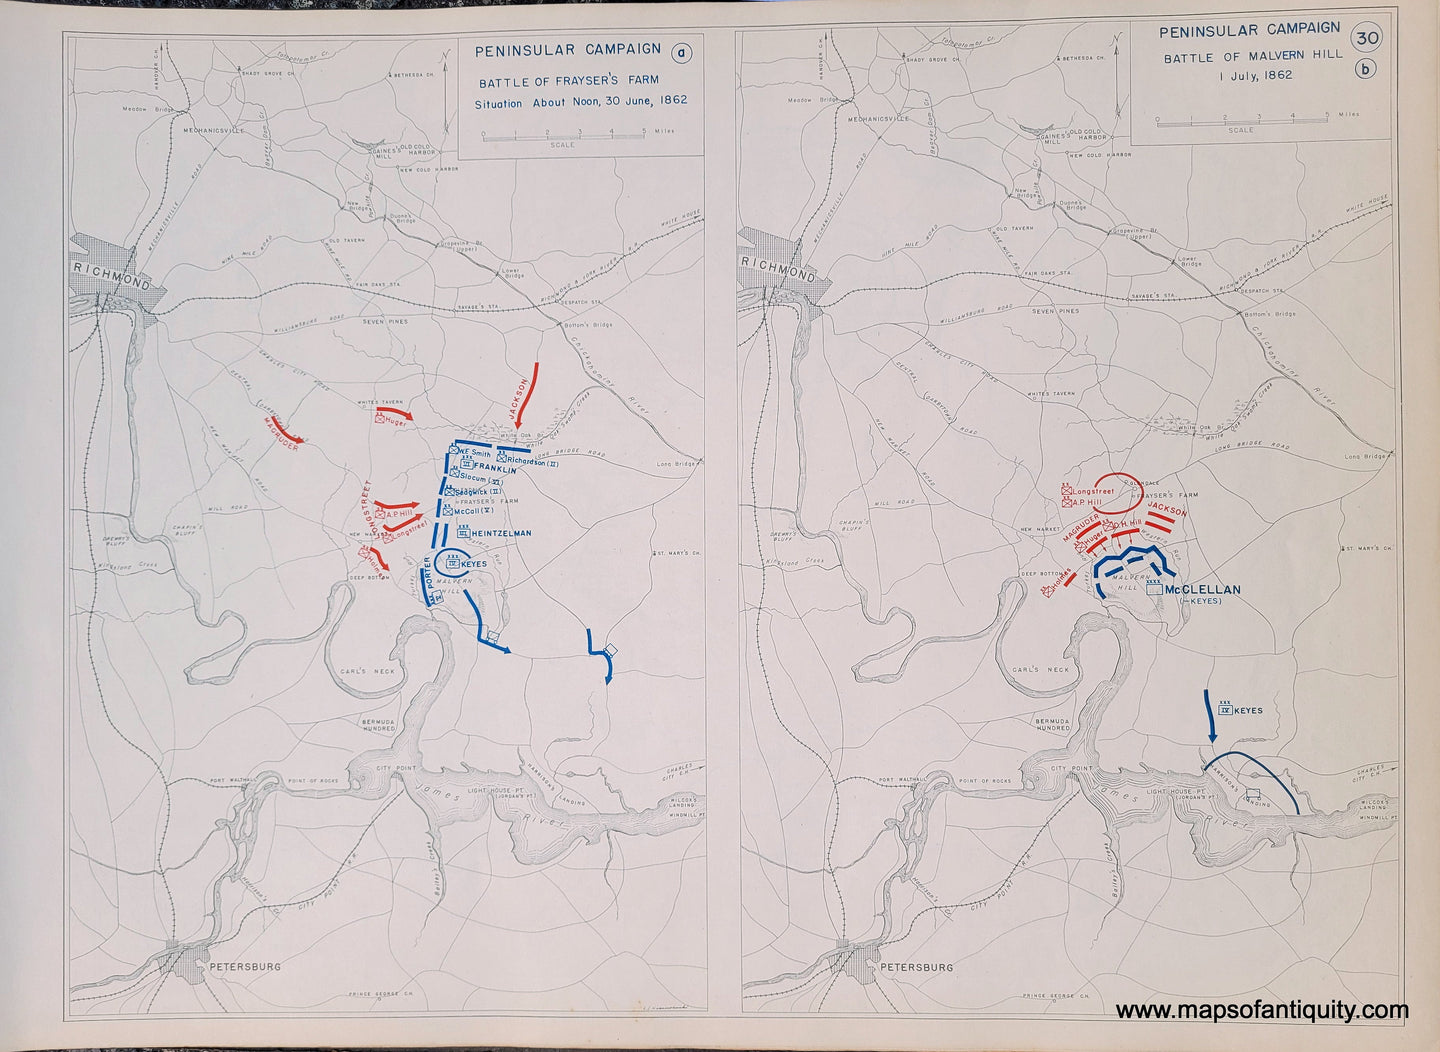 Genuine-Antique-Map-Peninsular-Campaign-Battle-of-Frayser's-Farm-Situation-About-30-June-1862-and-Battle-of-Malvern-Hill-1-July-1862-1948-Matthew-Forney-Steele-Dept-of-Military-Art-and-Engineering-US-Military-Academy-West-Point-Maps-Of-Antiquity